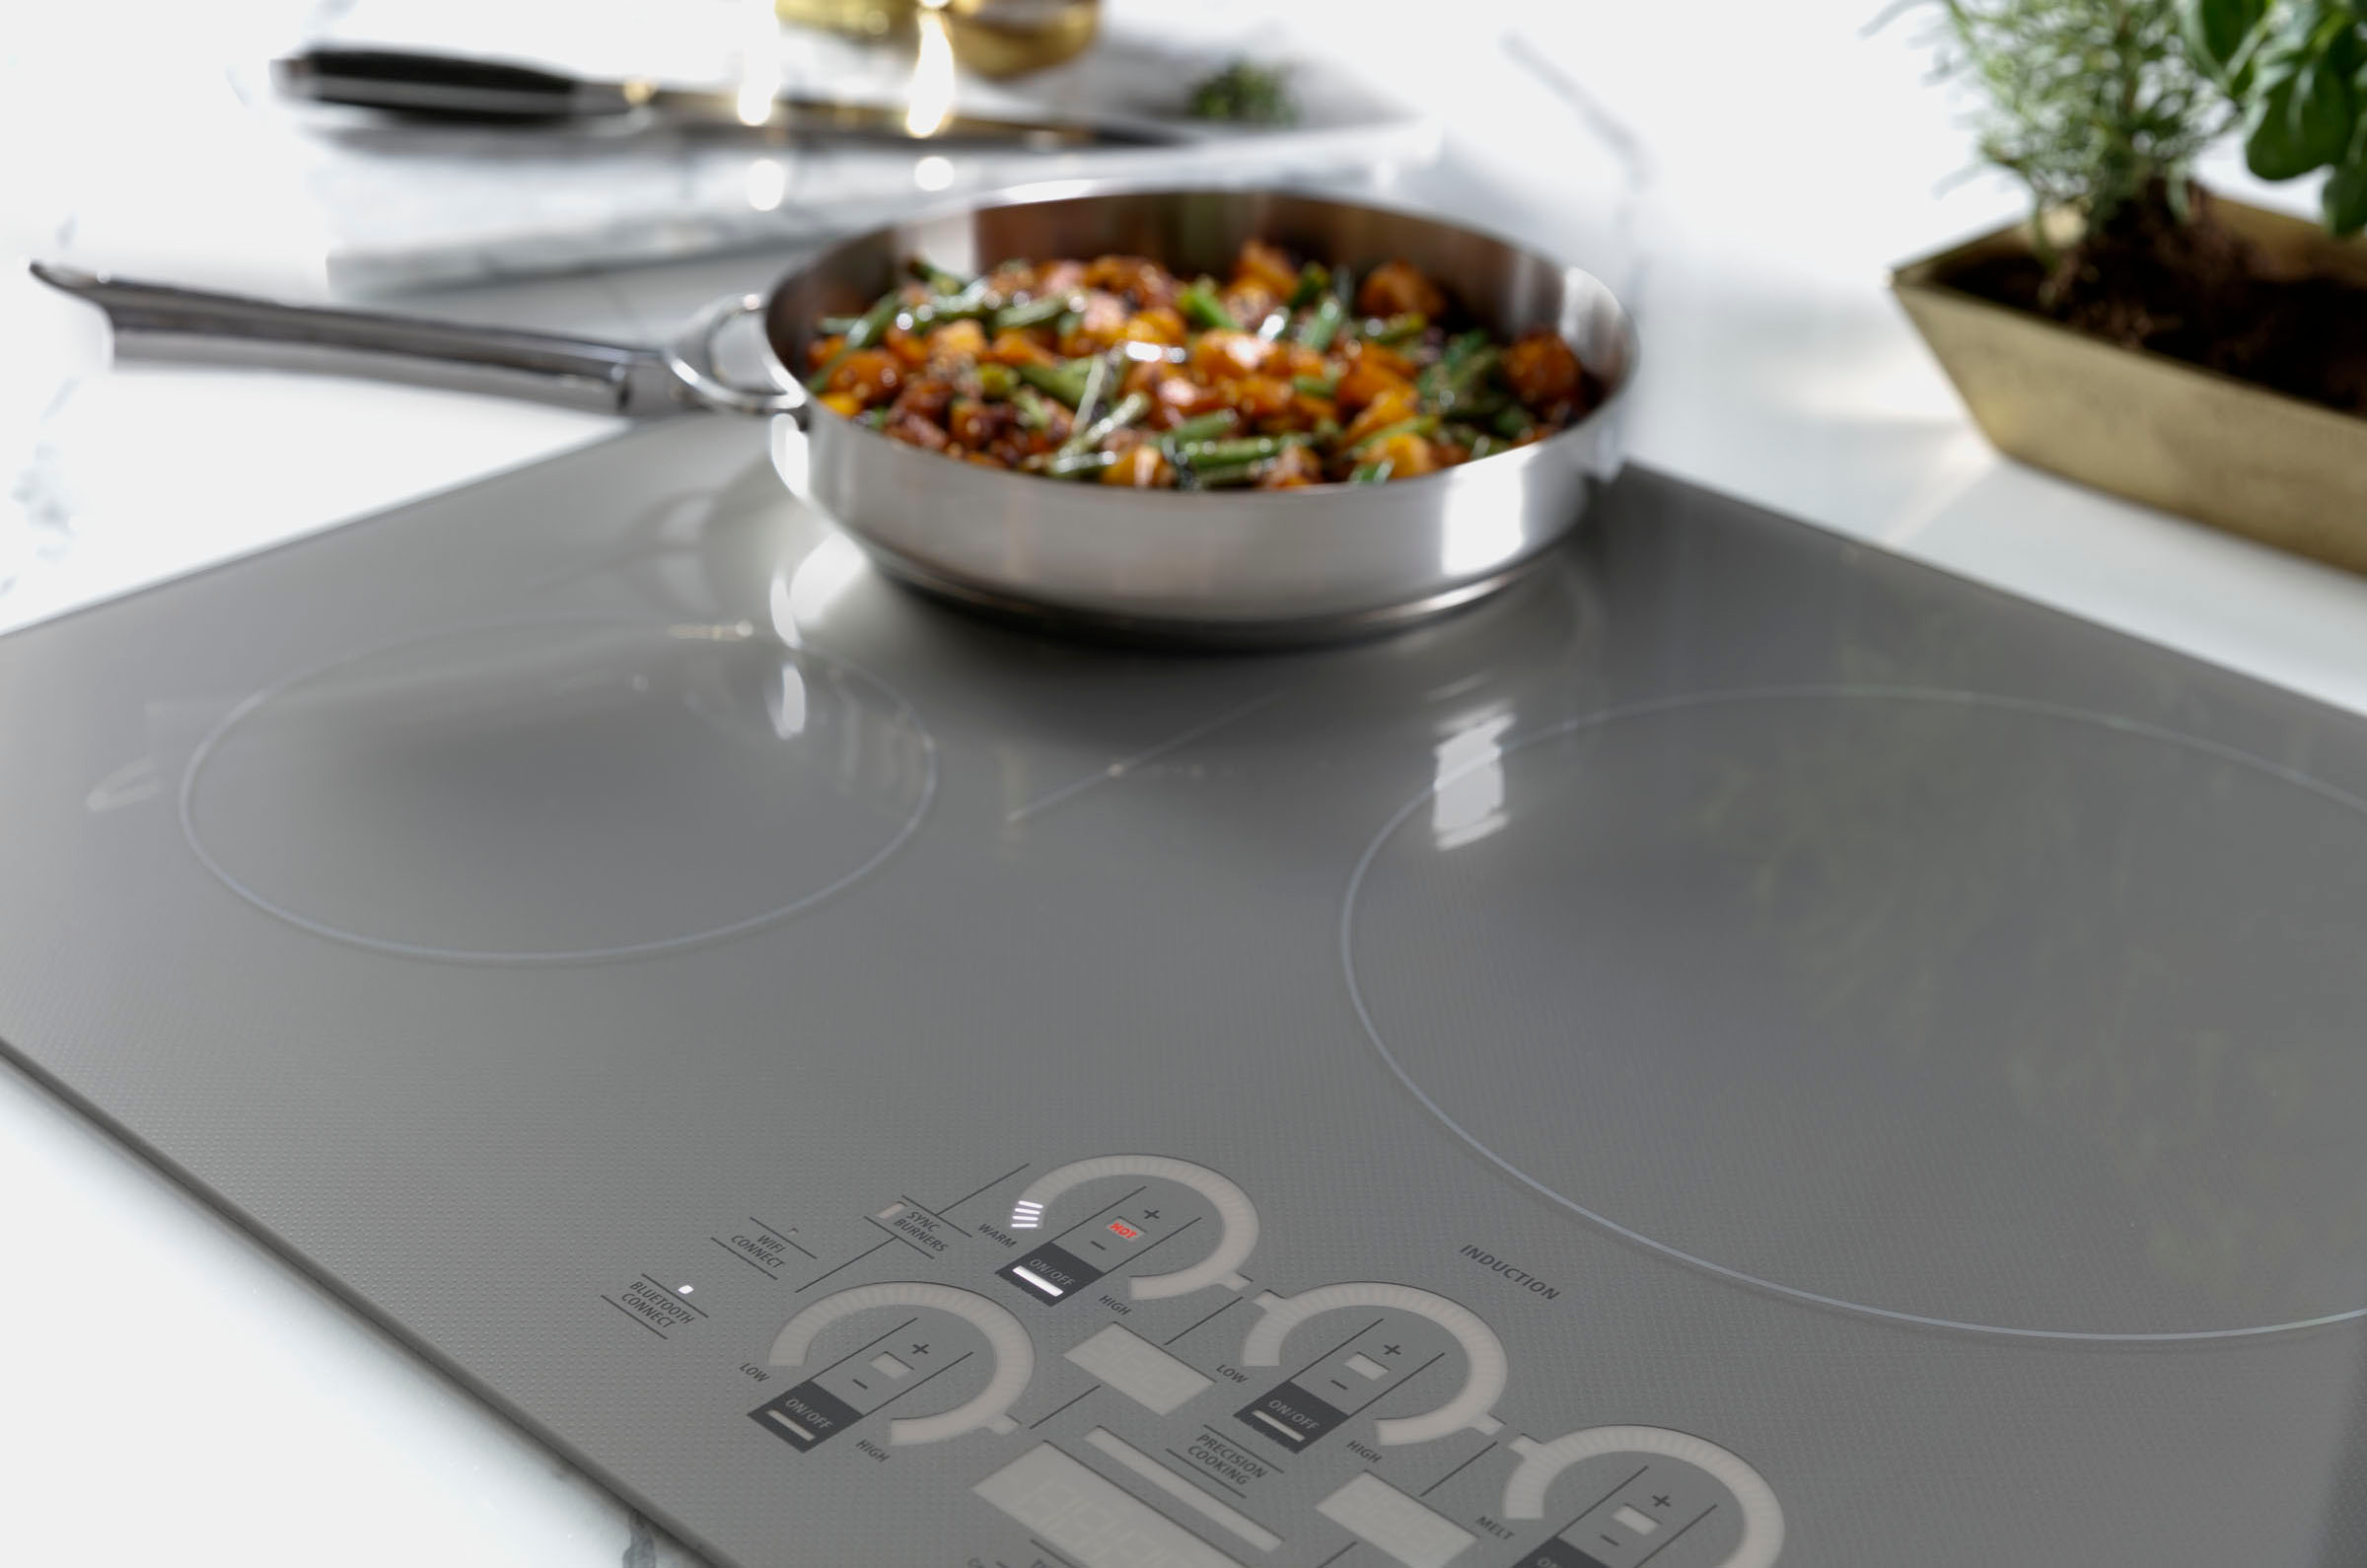 MONOGRAM 36 Built-In Induction Cooktop - Silver